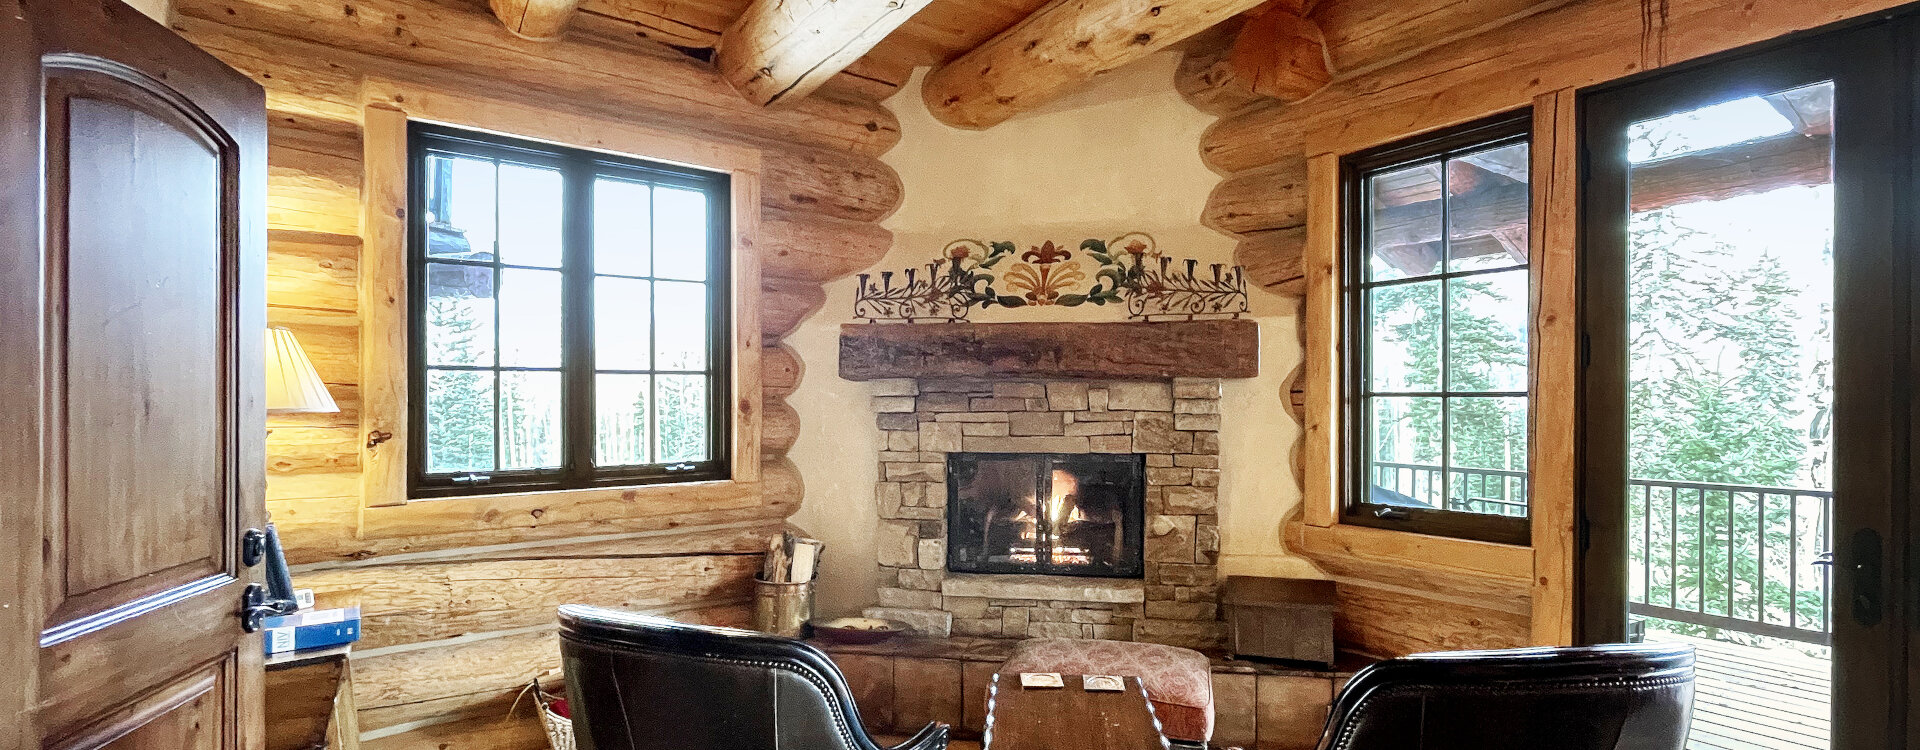 5.01-Mountain-Village-Vacation-Rental-Hilltop-Hideaway-Main-level-fireplace-sitting-area-1